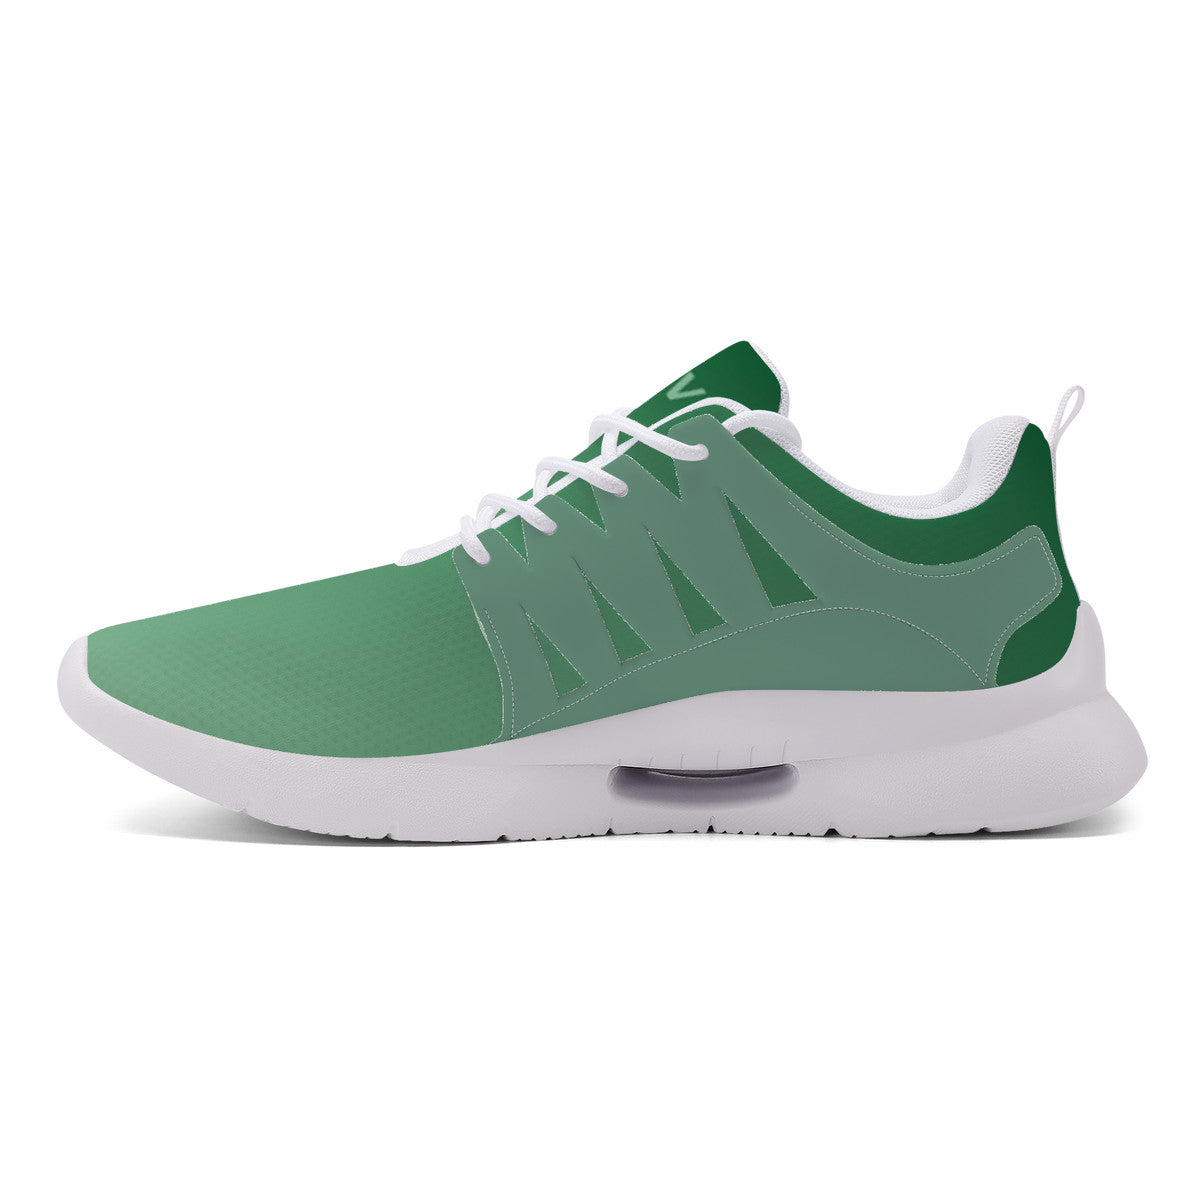 Workout Shoes - Move - Green